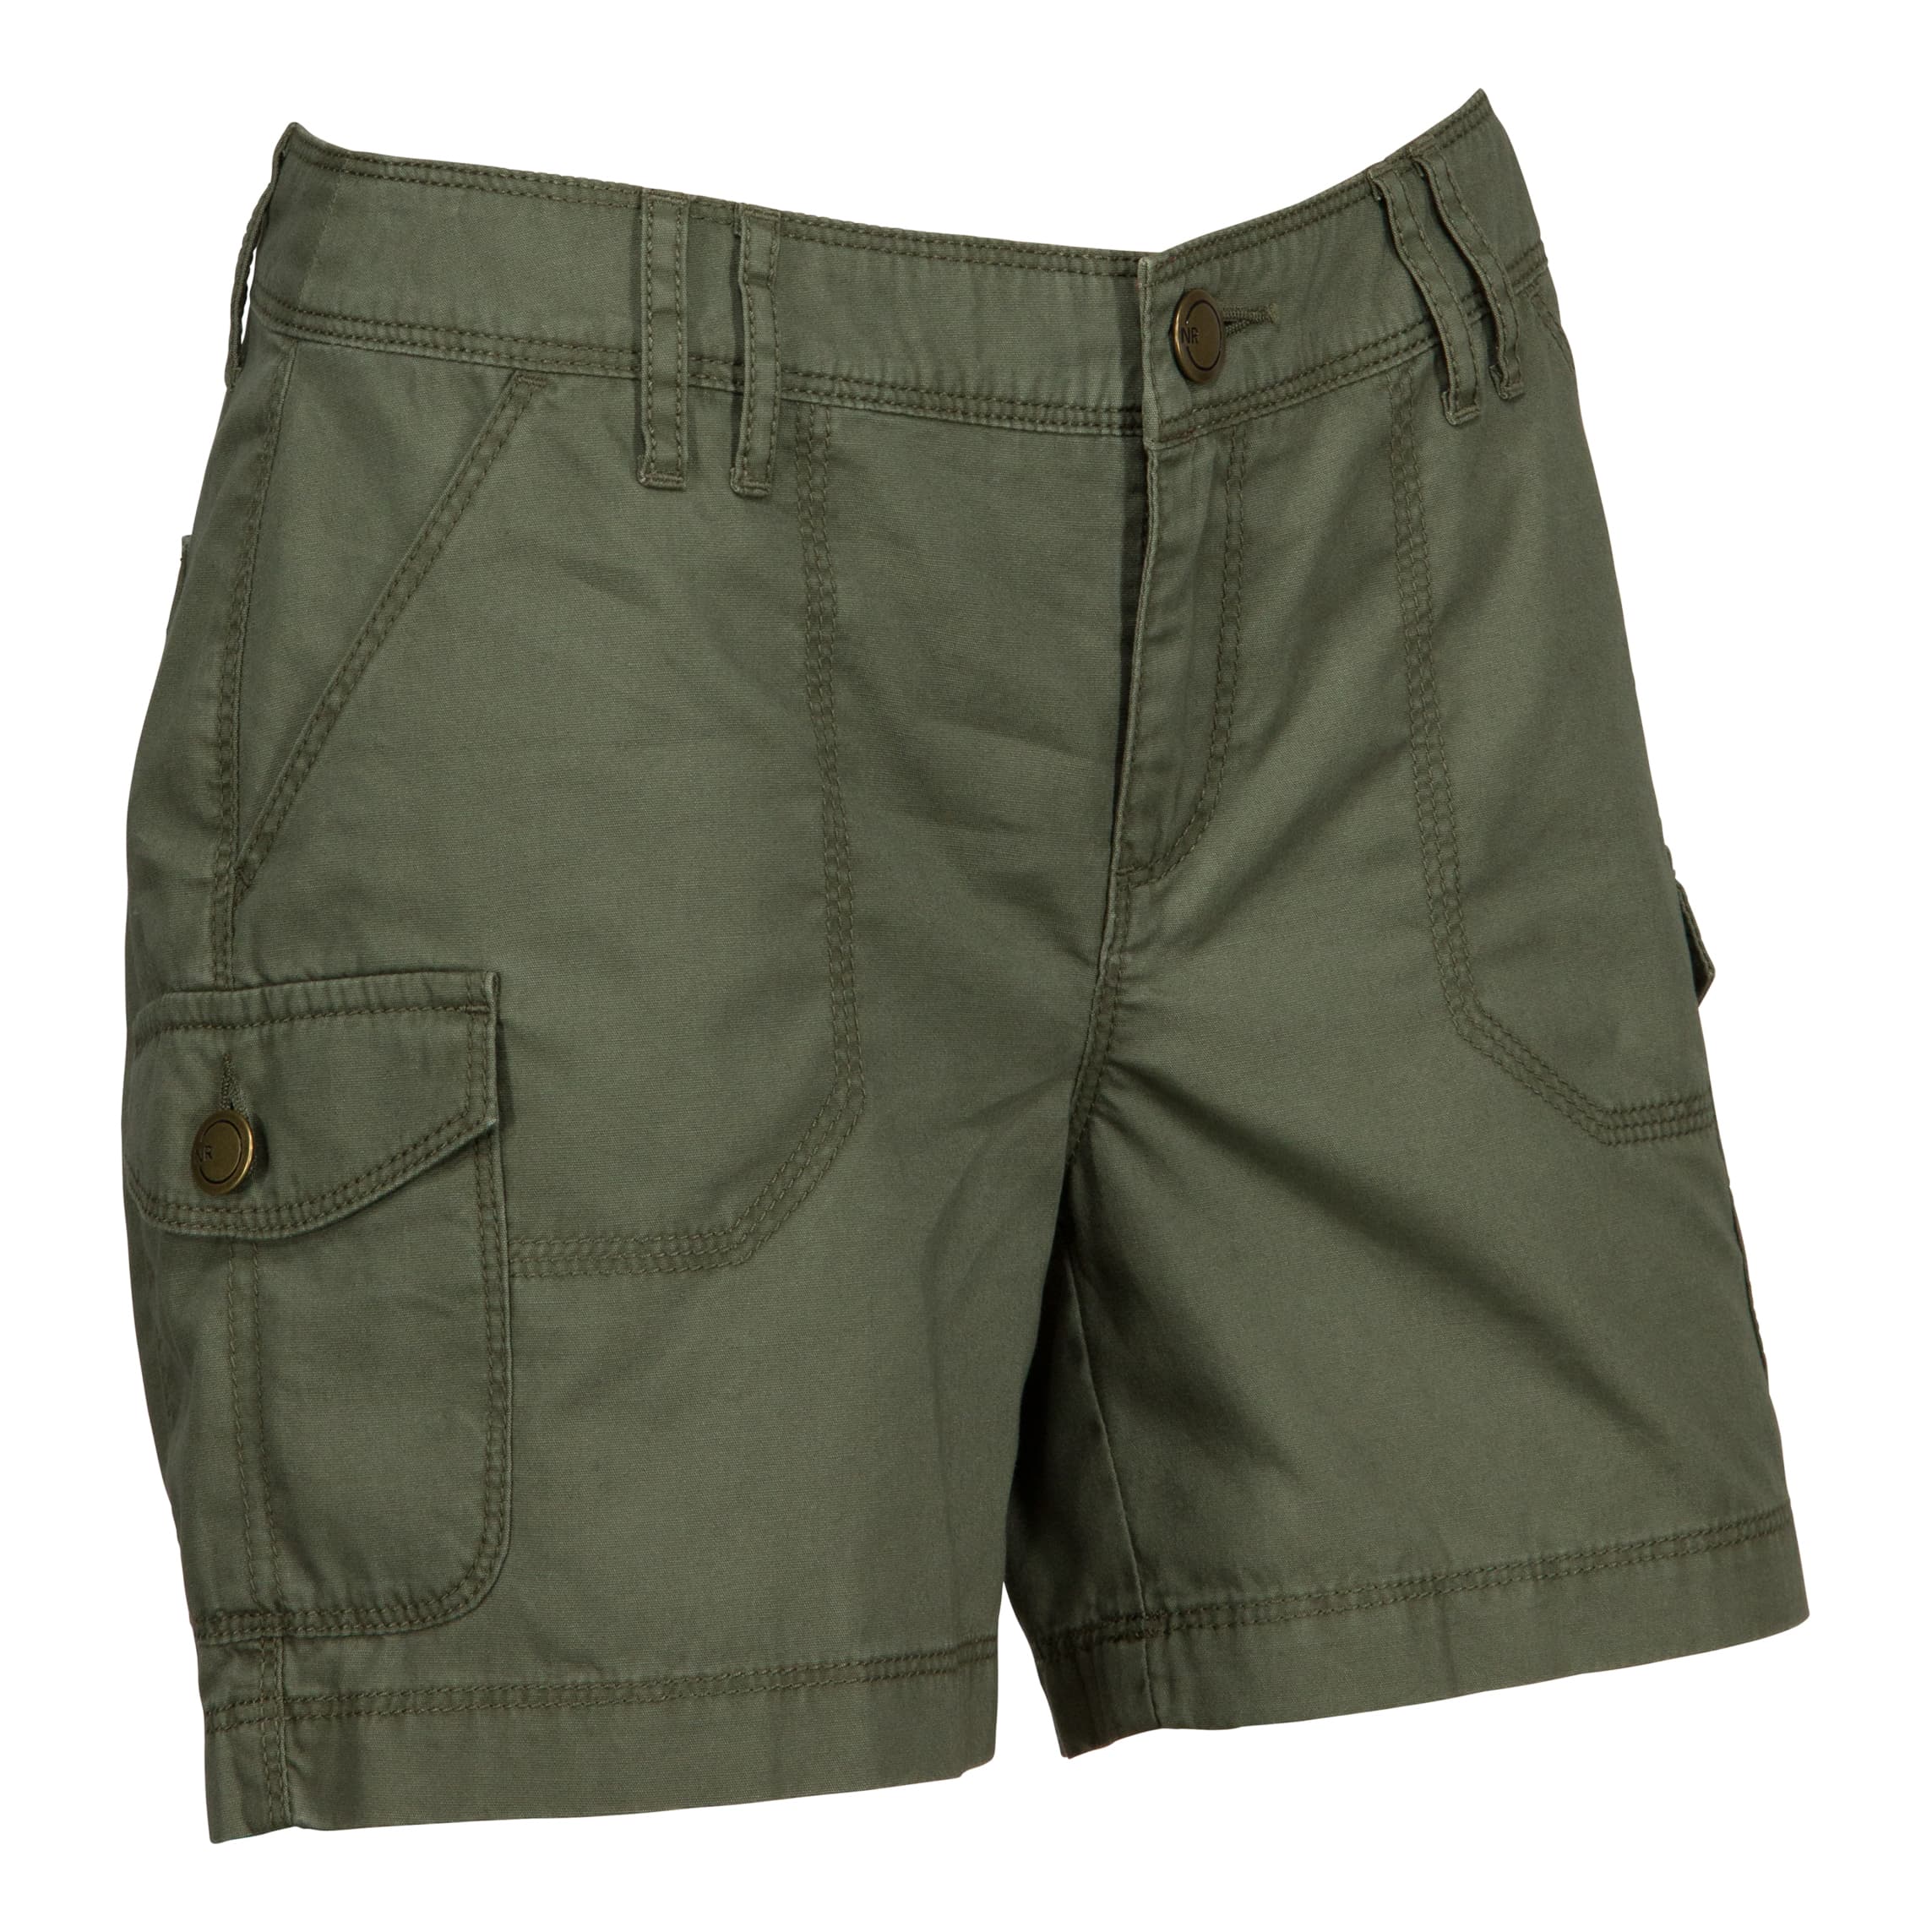 Natural Reflections® Women’s Canvas Cargo Shorts - Dusty Olive